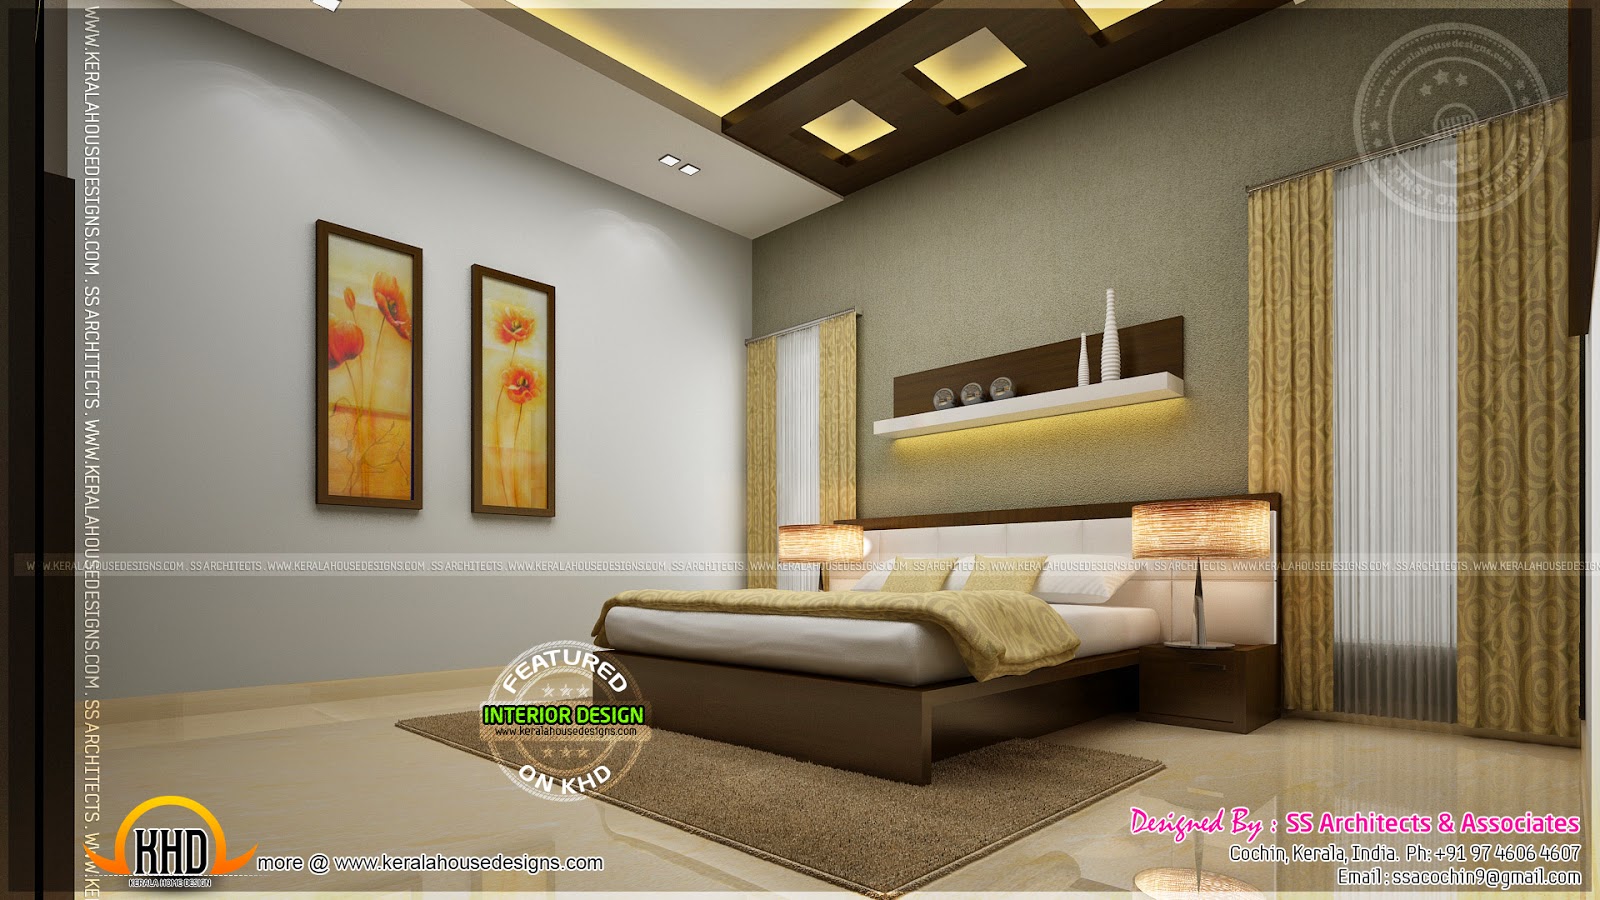 nggibrut: Awesome master bedroom interior